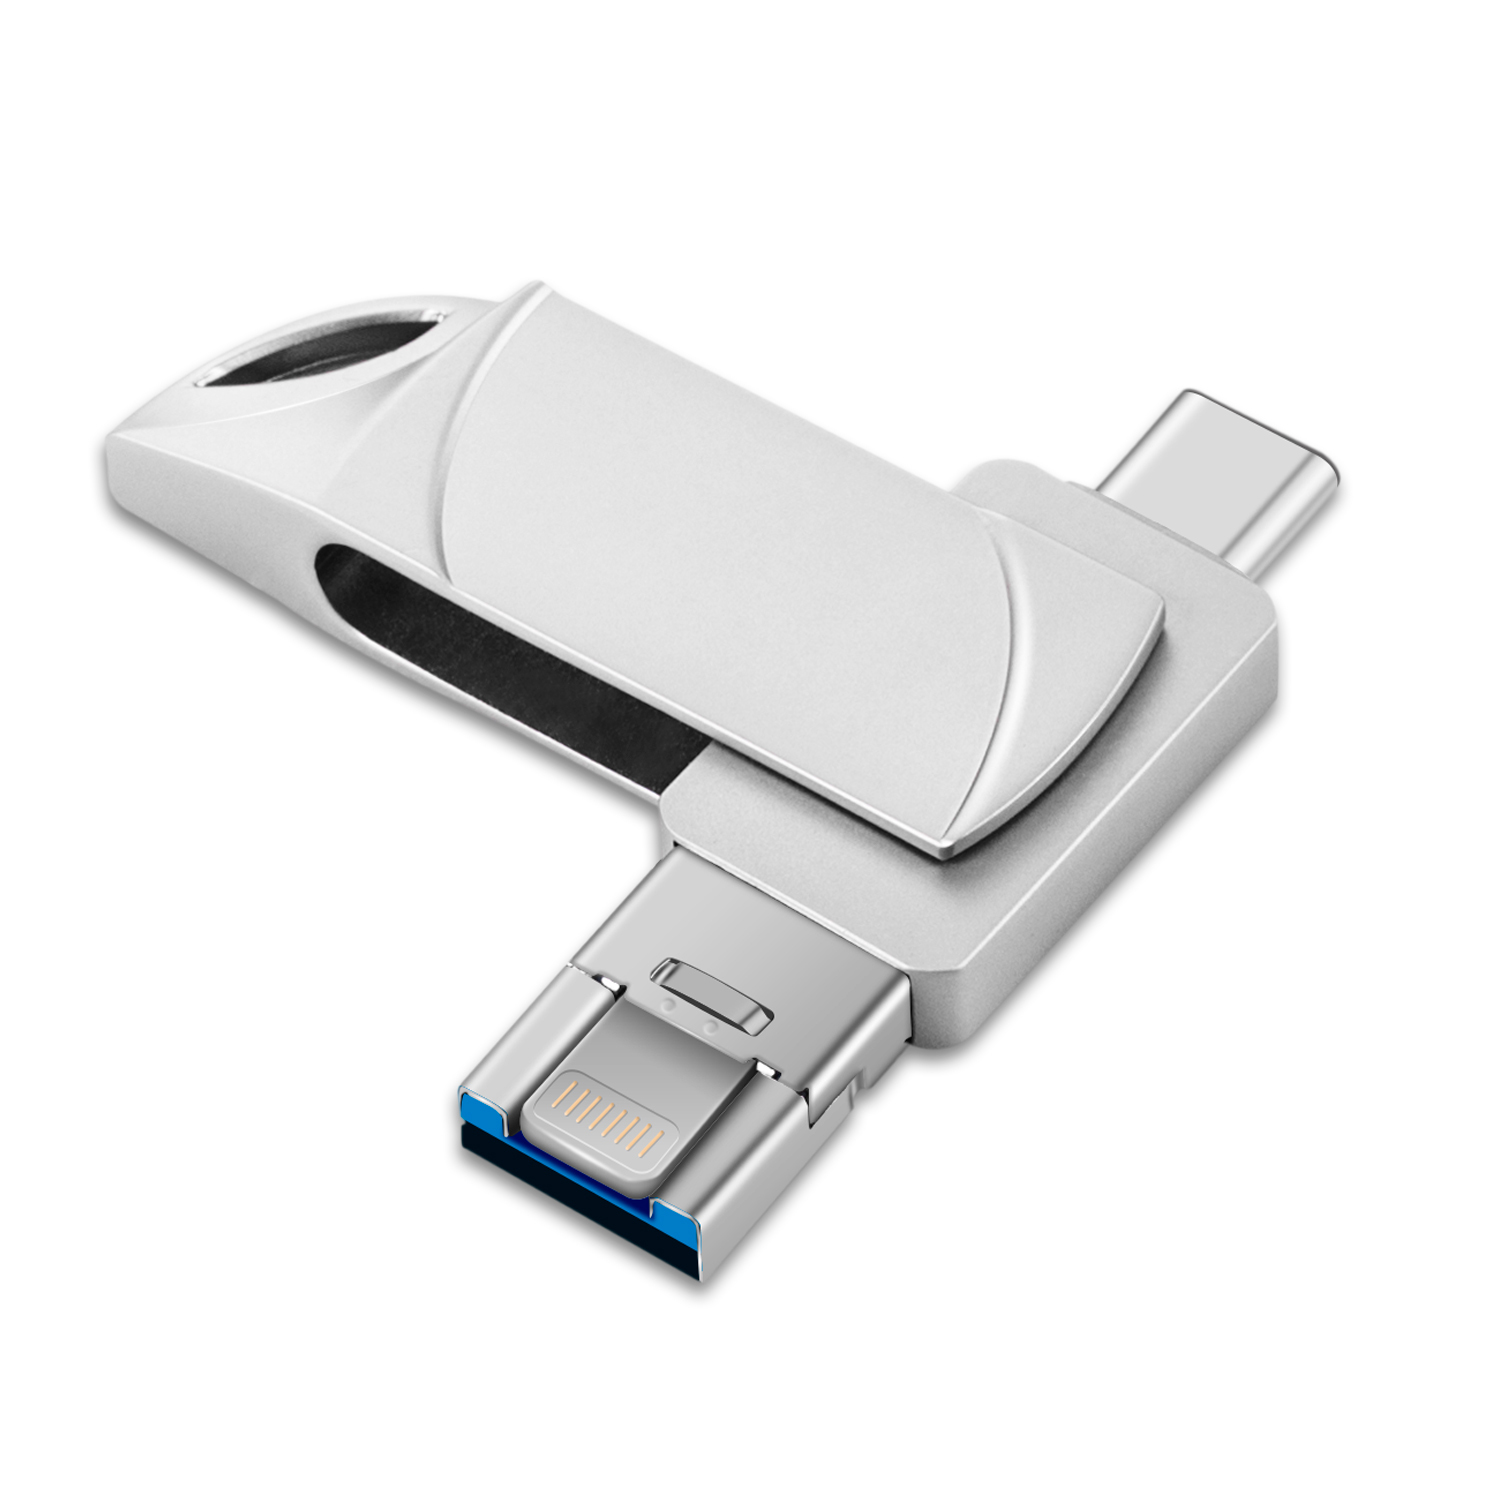 usb memory stick for pc and mac